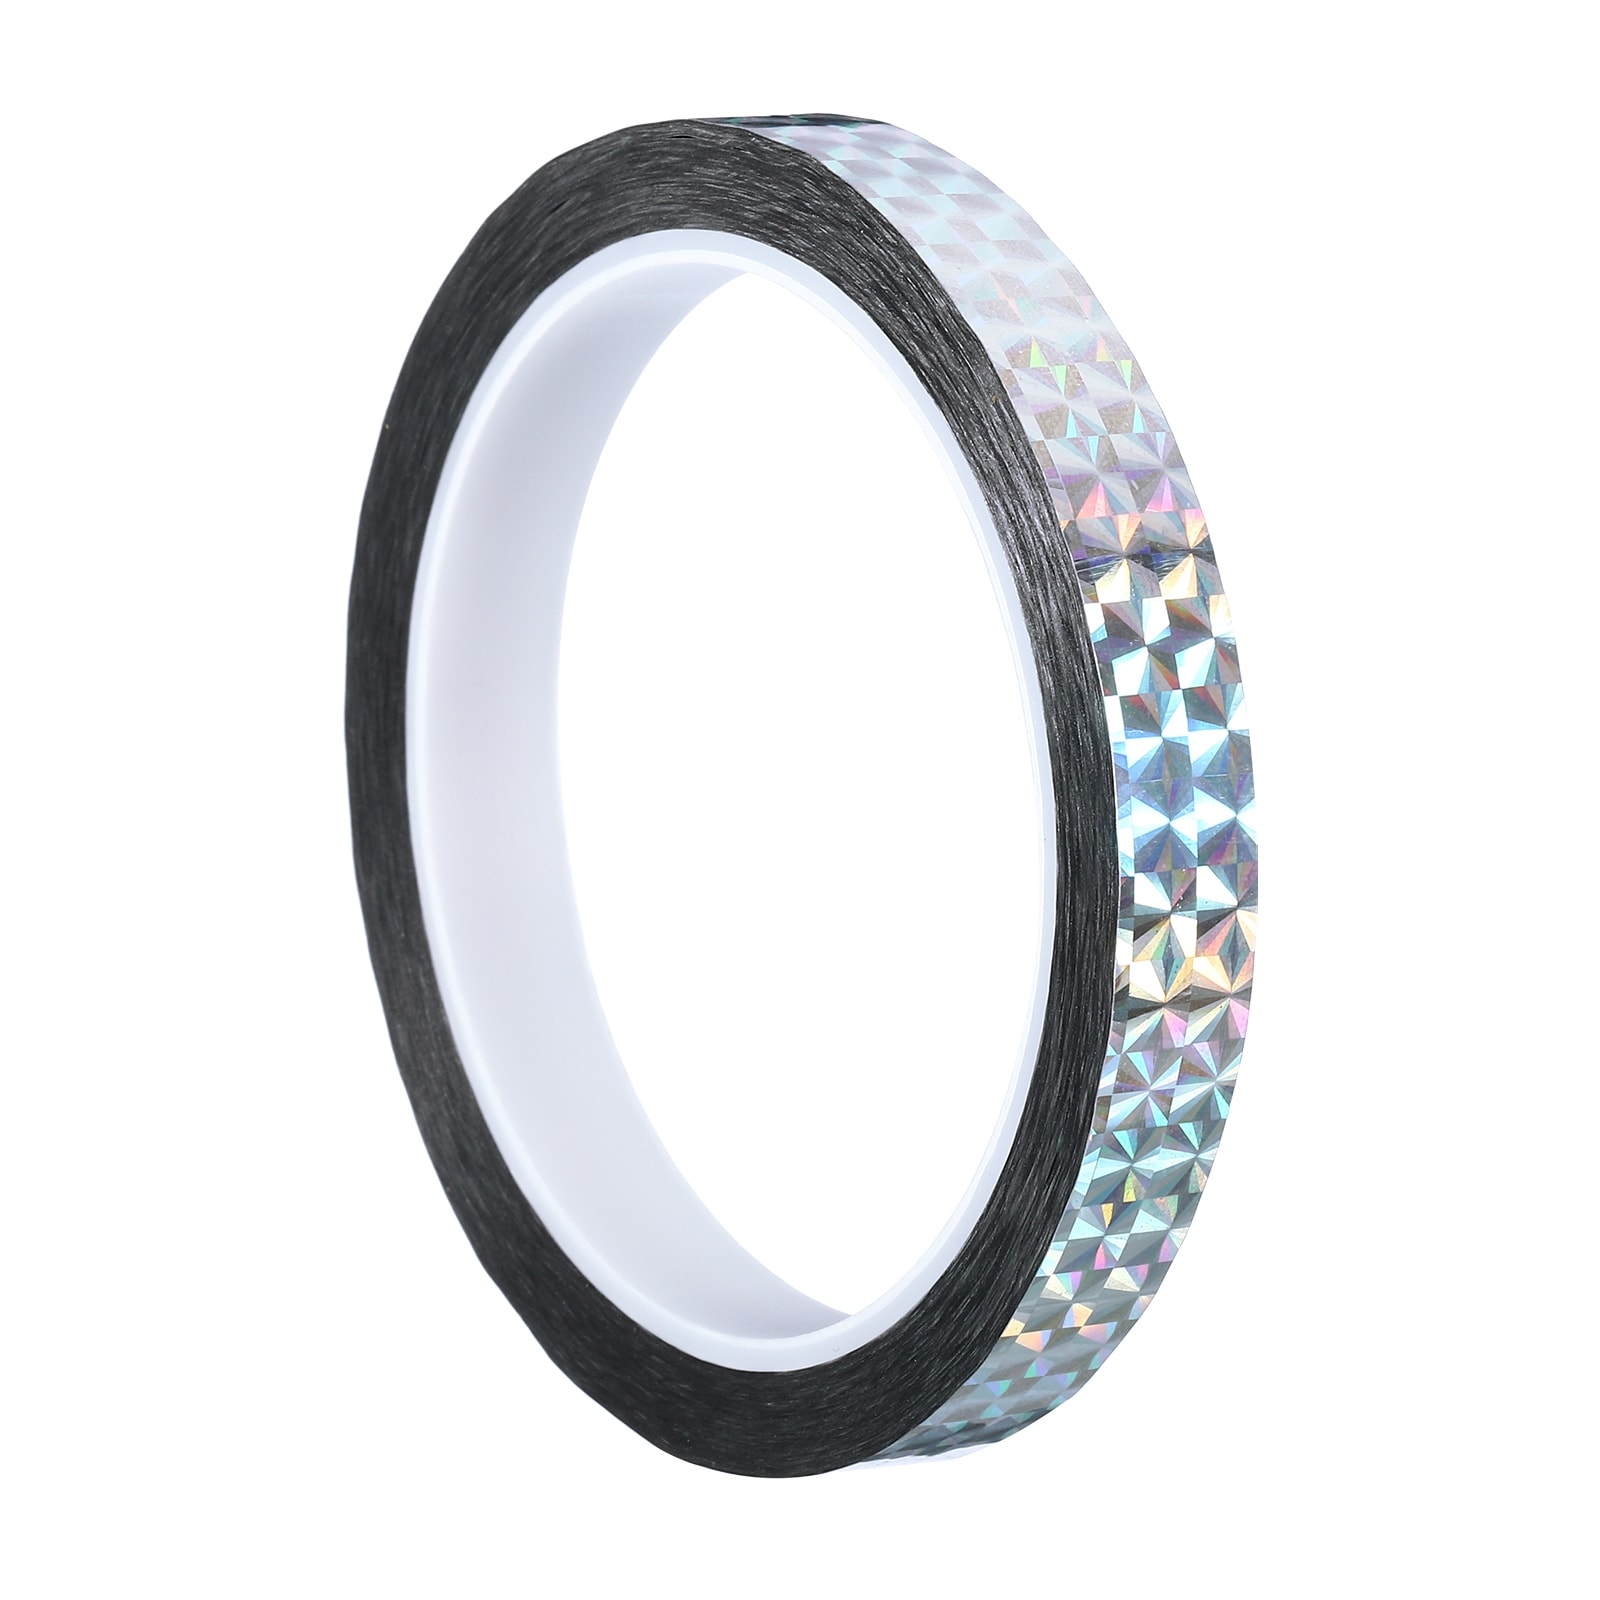 Prism Tape, Holographic Reflective Adhesive DIY Craft Wrap Decoration - Bed  Bath & Beyond - 37036434